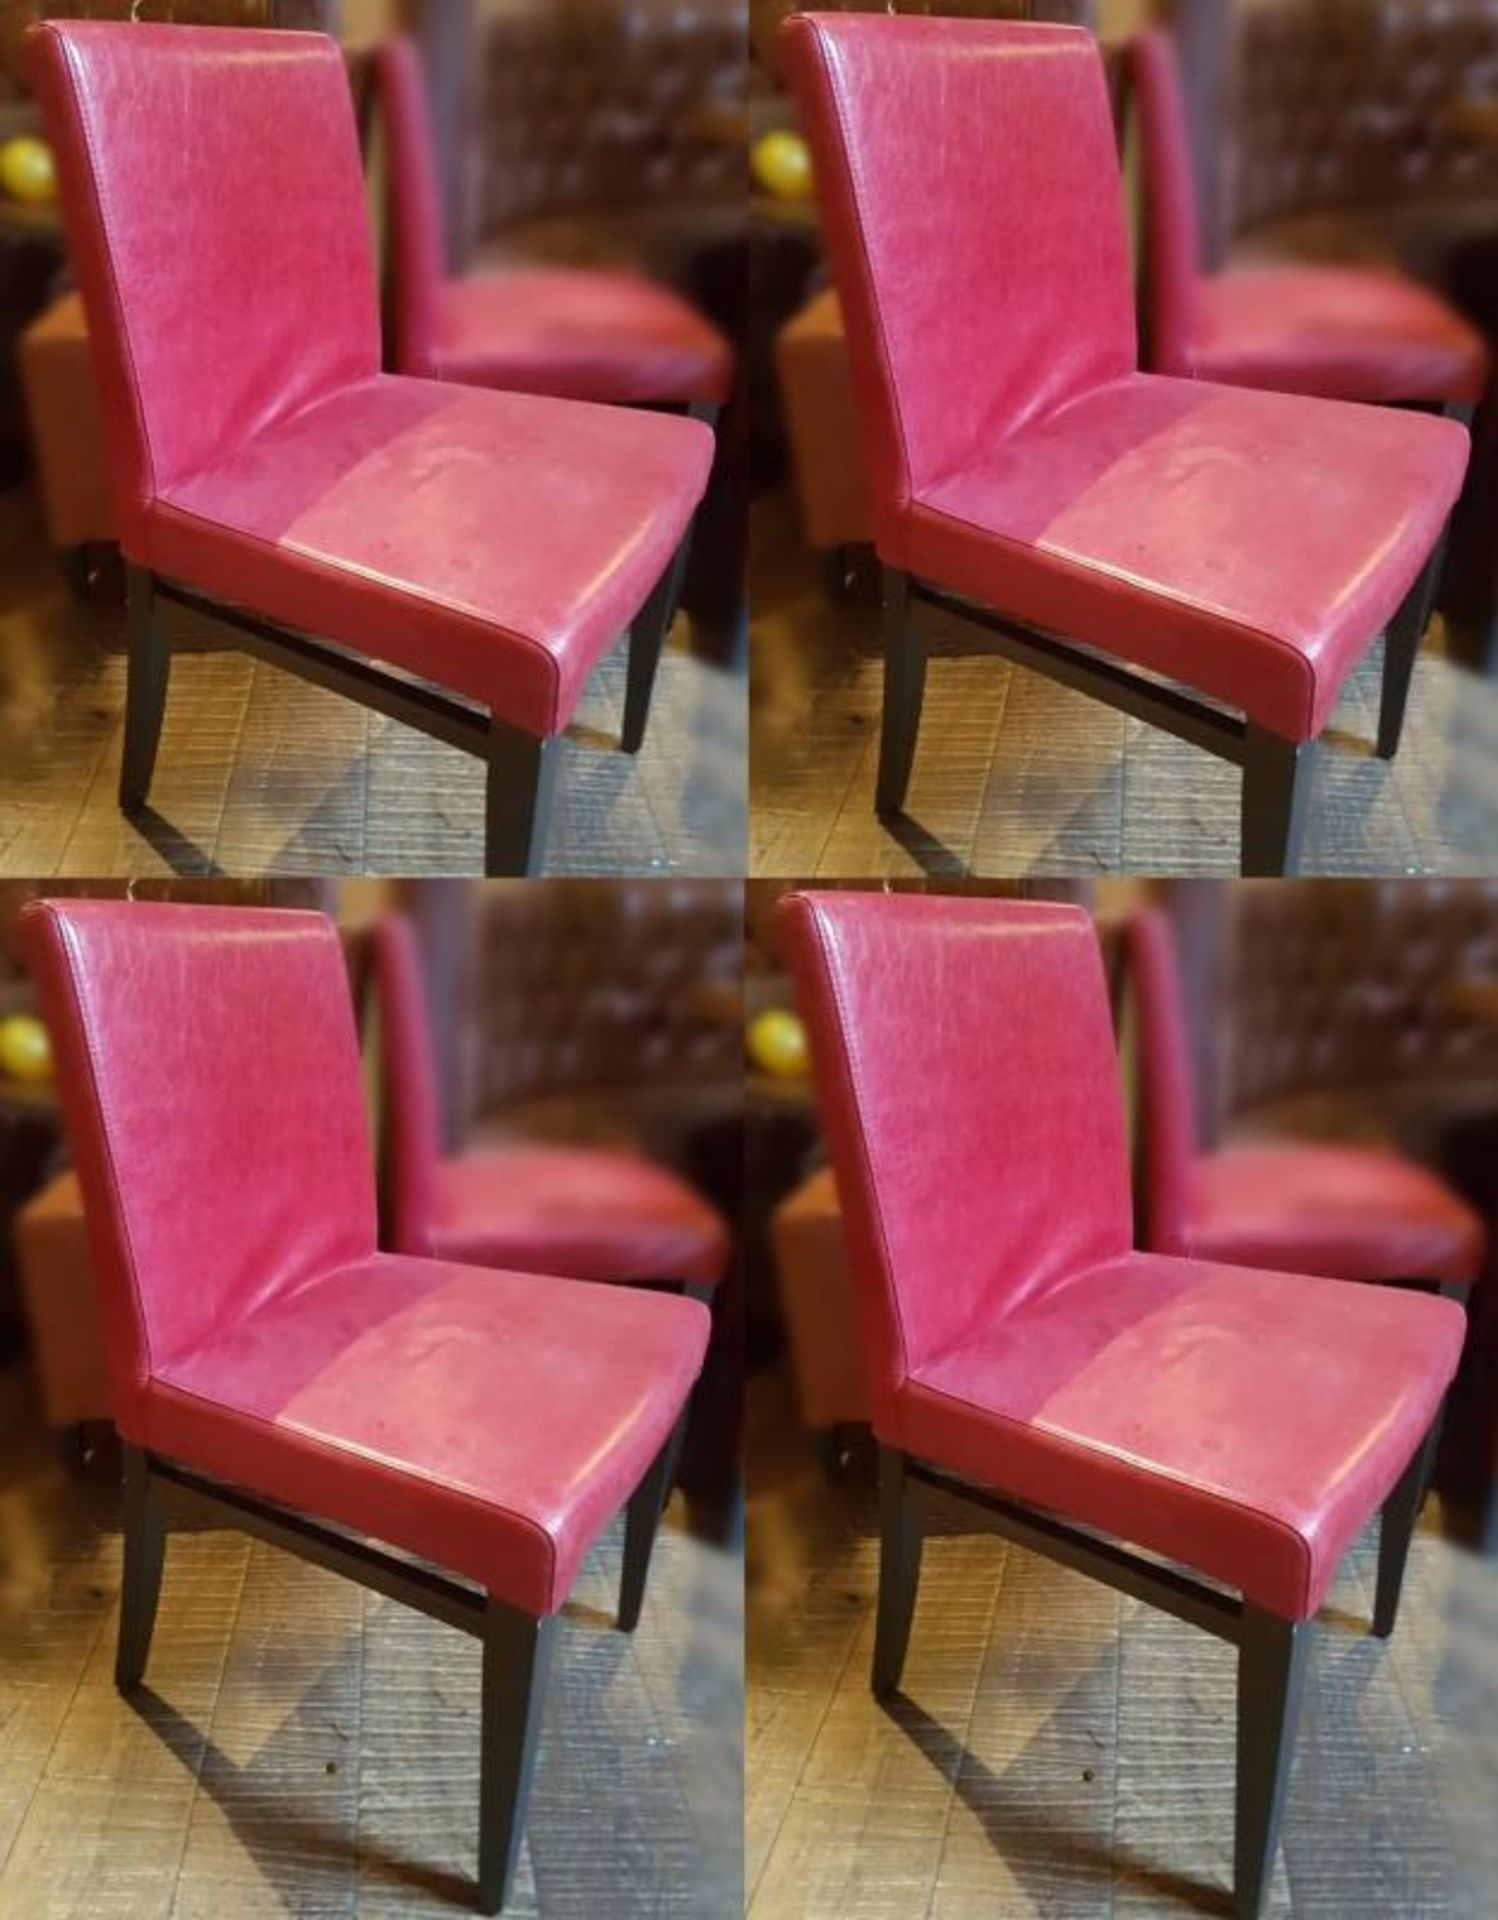 7 x Hard-wearing Red Leather Upholstered Commercial Dining Chairs - Recently Removed From A City Cen